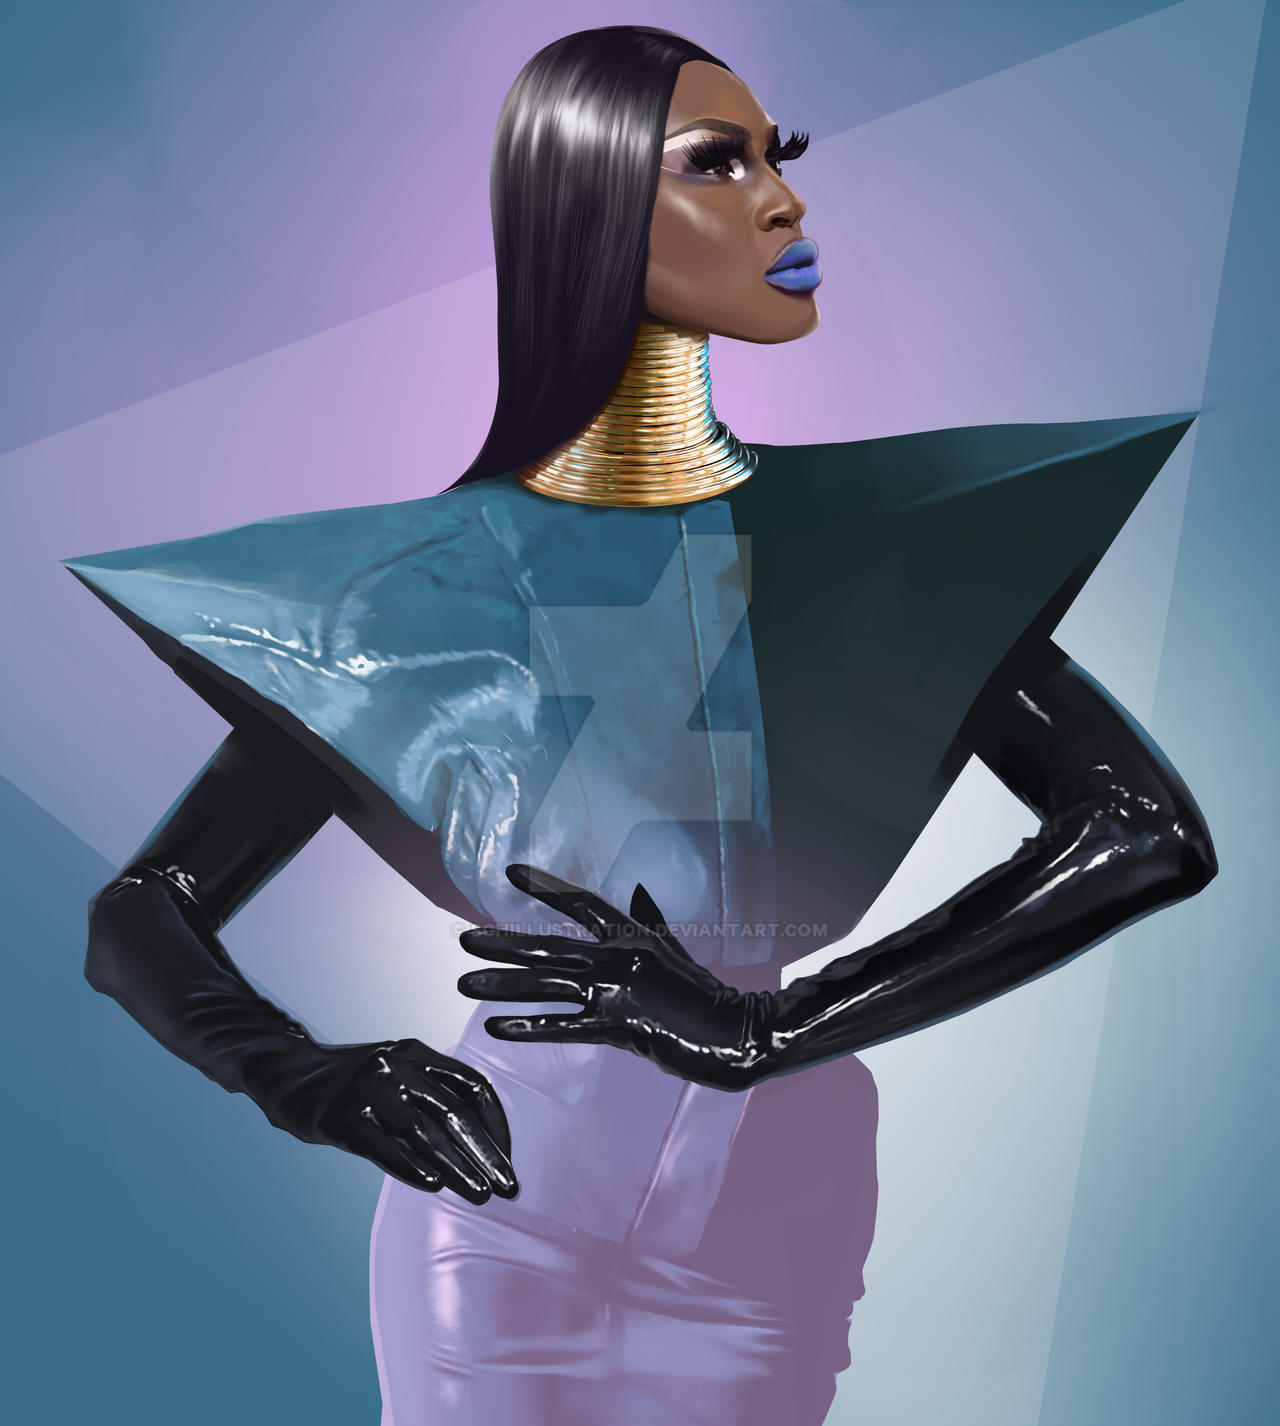 Drag Queen Shea Coulee by SGHILLUSTRATION on DeviantArt